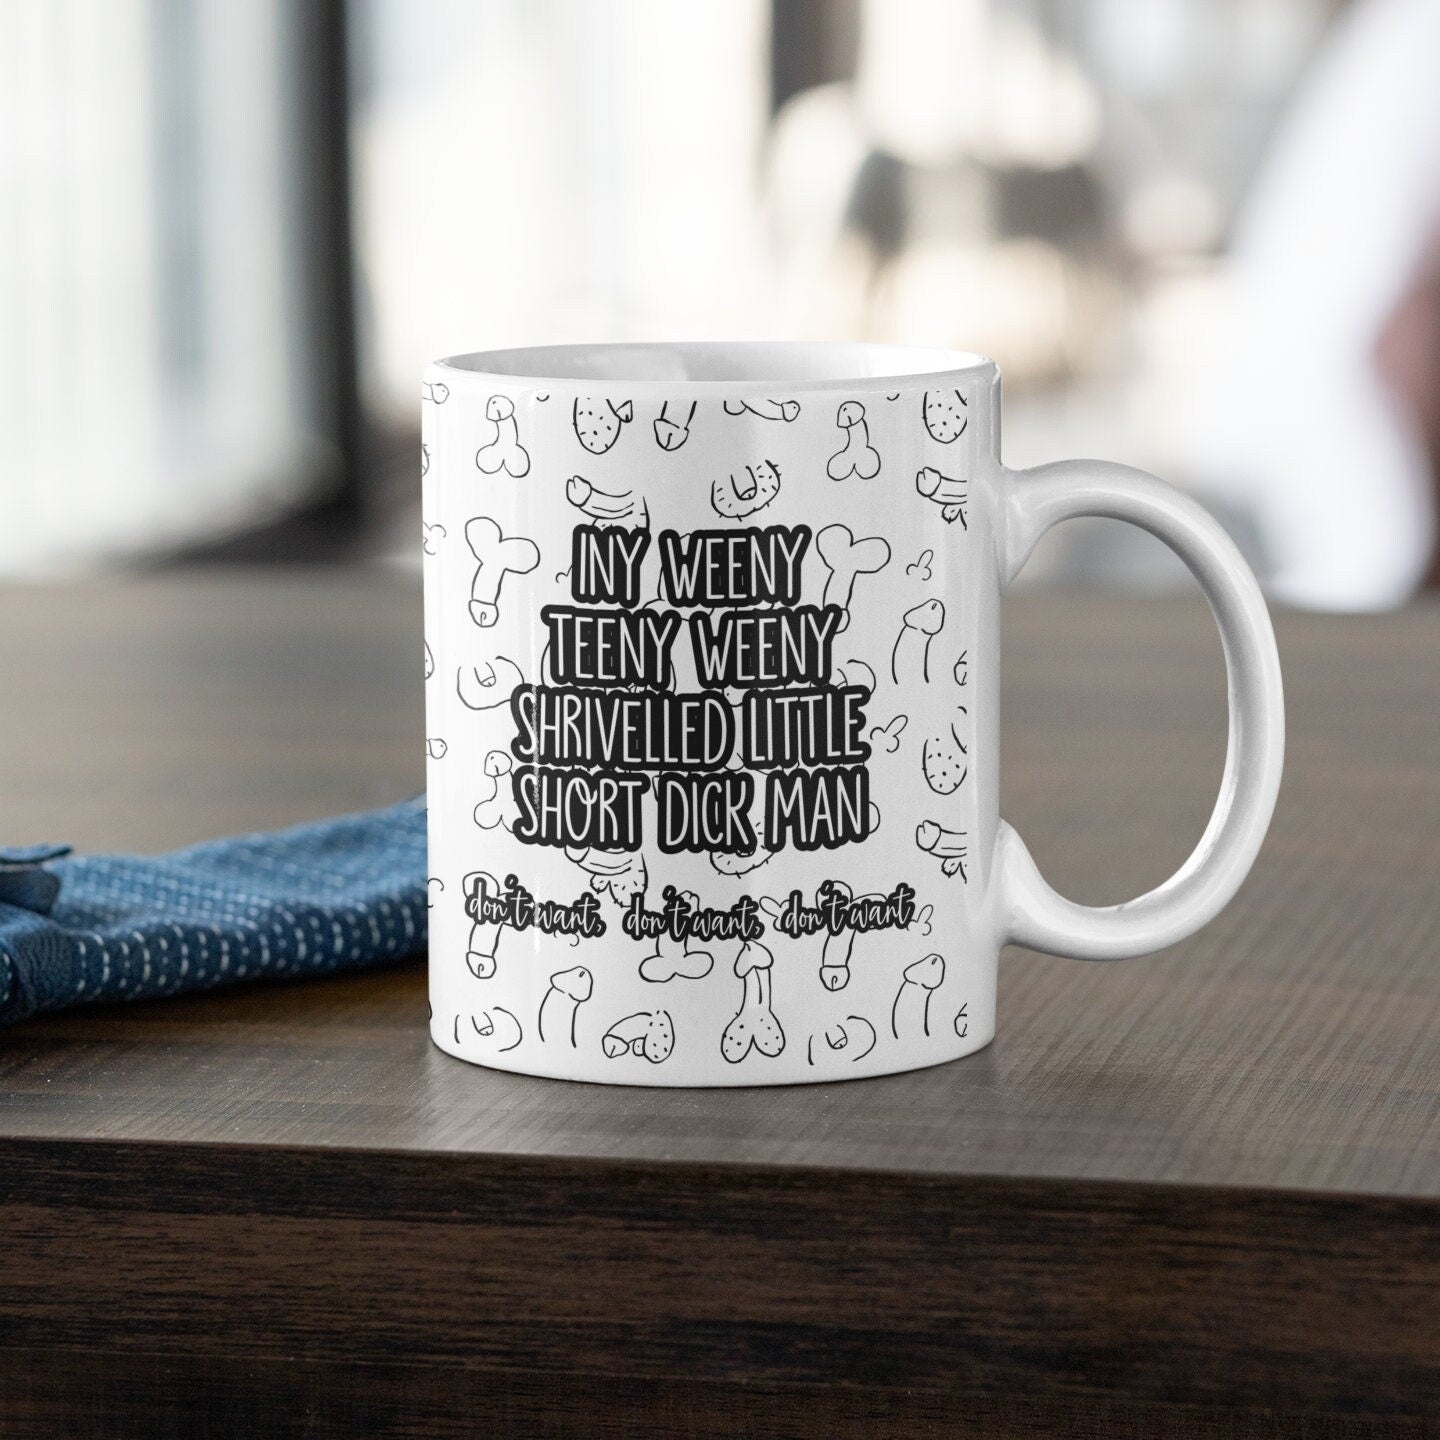 White mug with a funny willy design printed throughout. Over the print it reads iny weeny teeny weeny shrivelled little short dick man.. don't want, don't want, don't want.